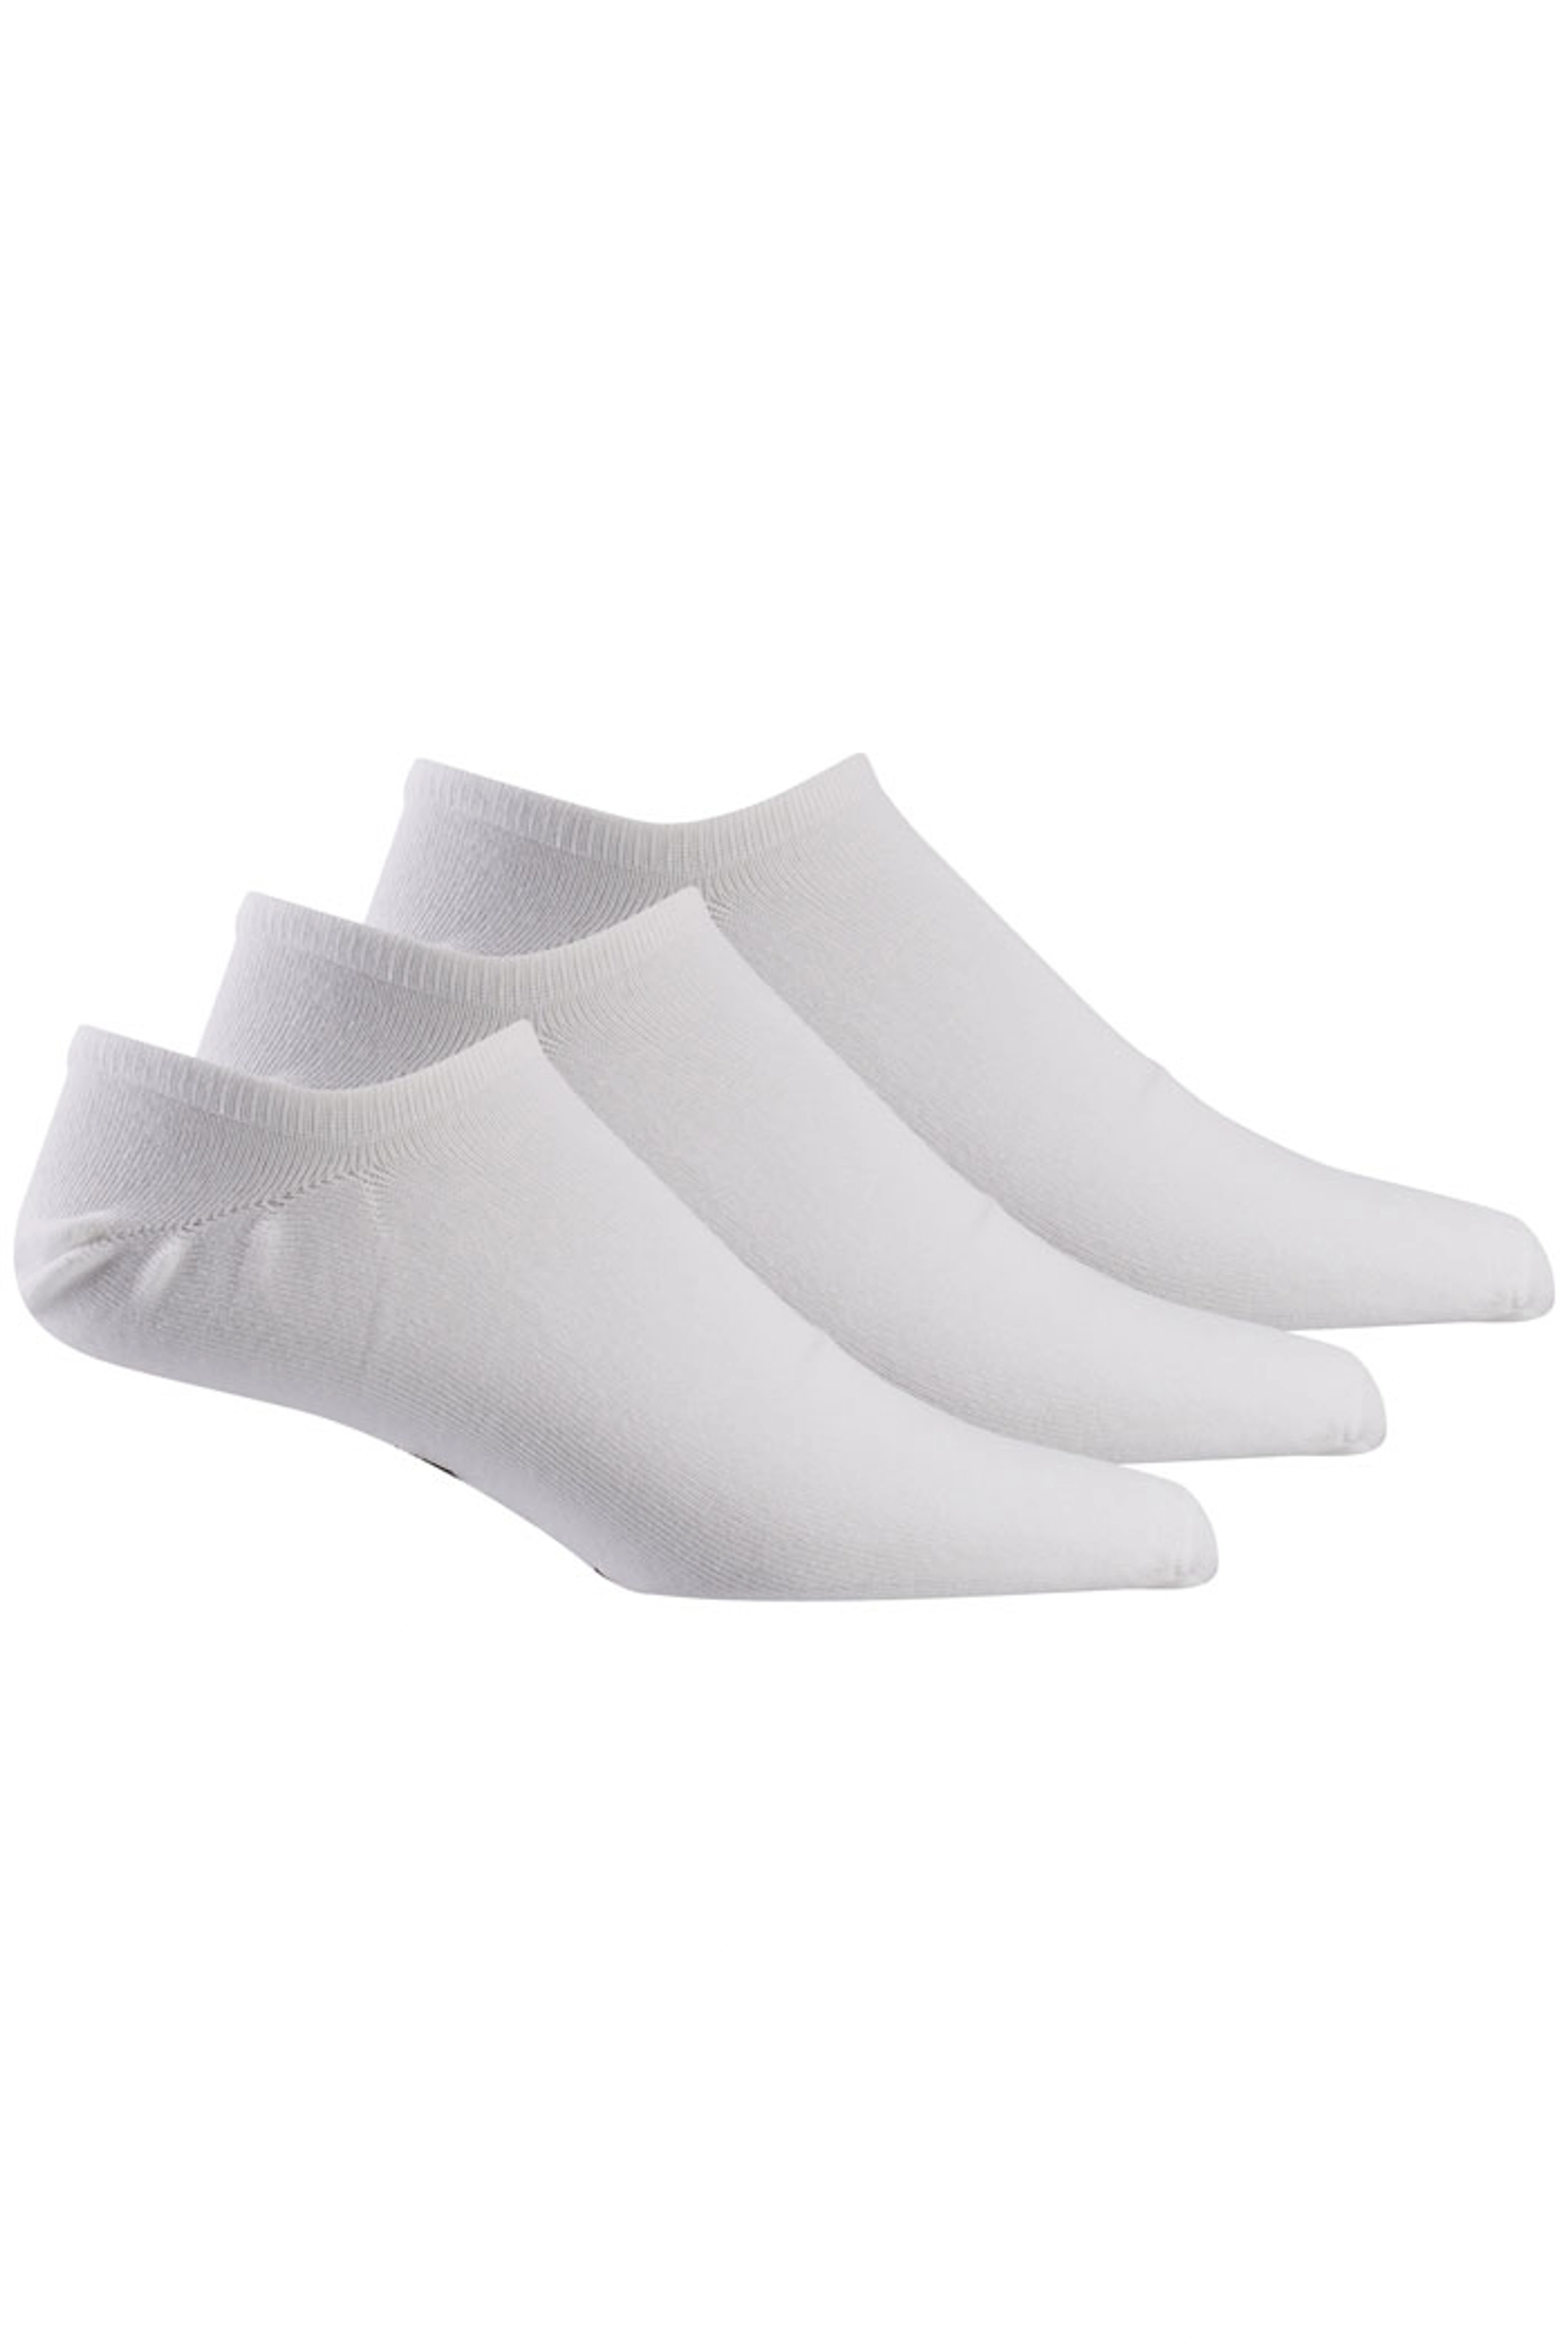 Active Foundation Invisible Socks 3 Pairs